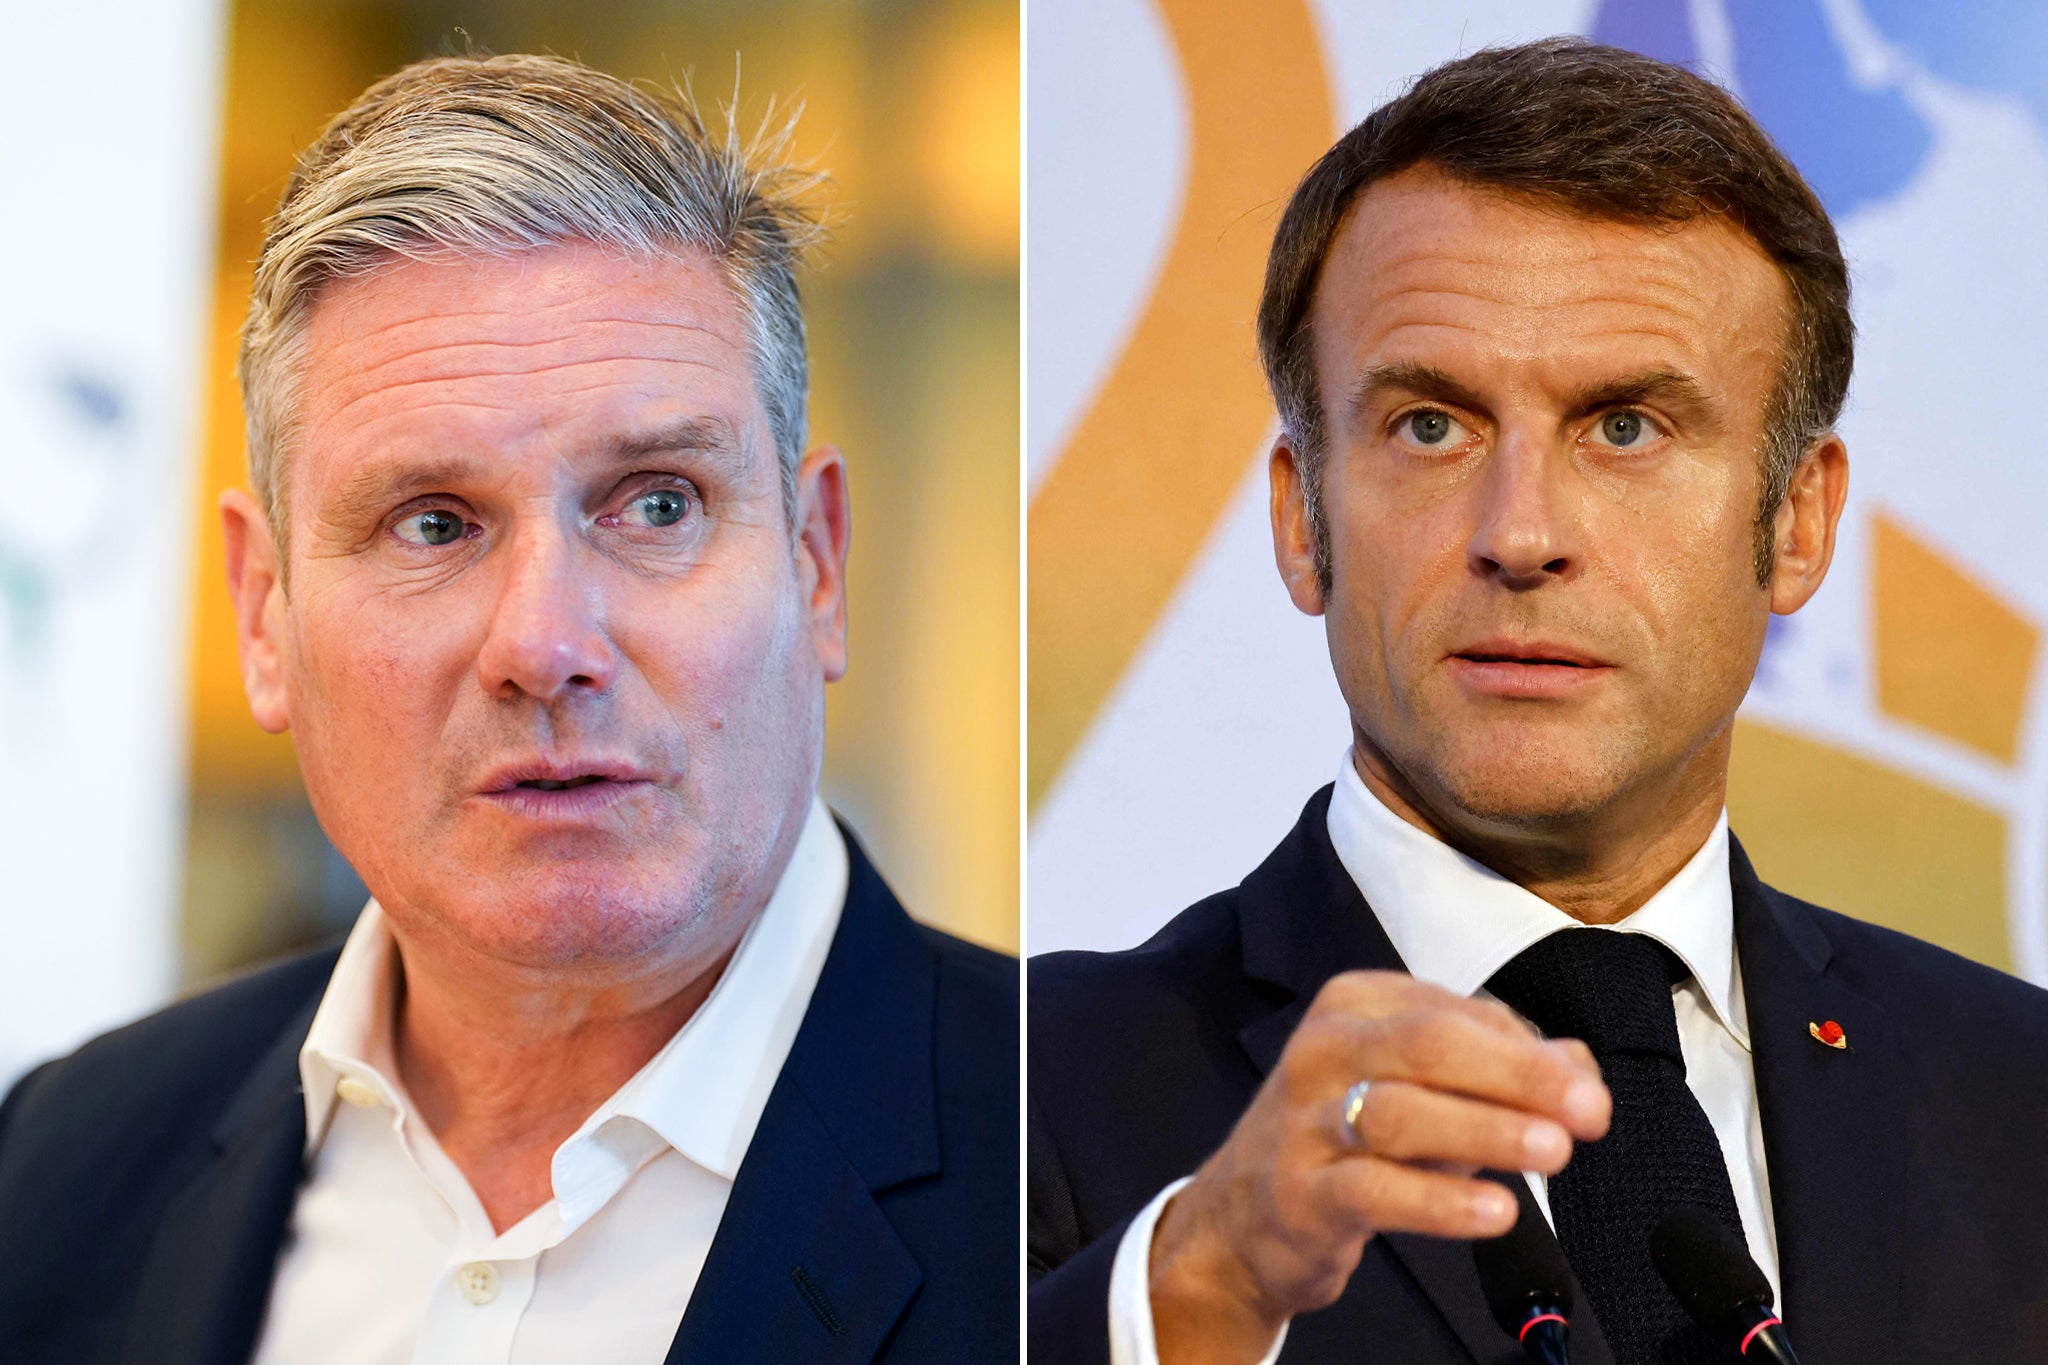 Keir Starmer is set to make his most high-profile appearance yet on the world stage when he meets Emmanuel Macron next week